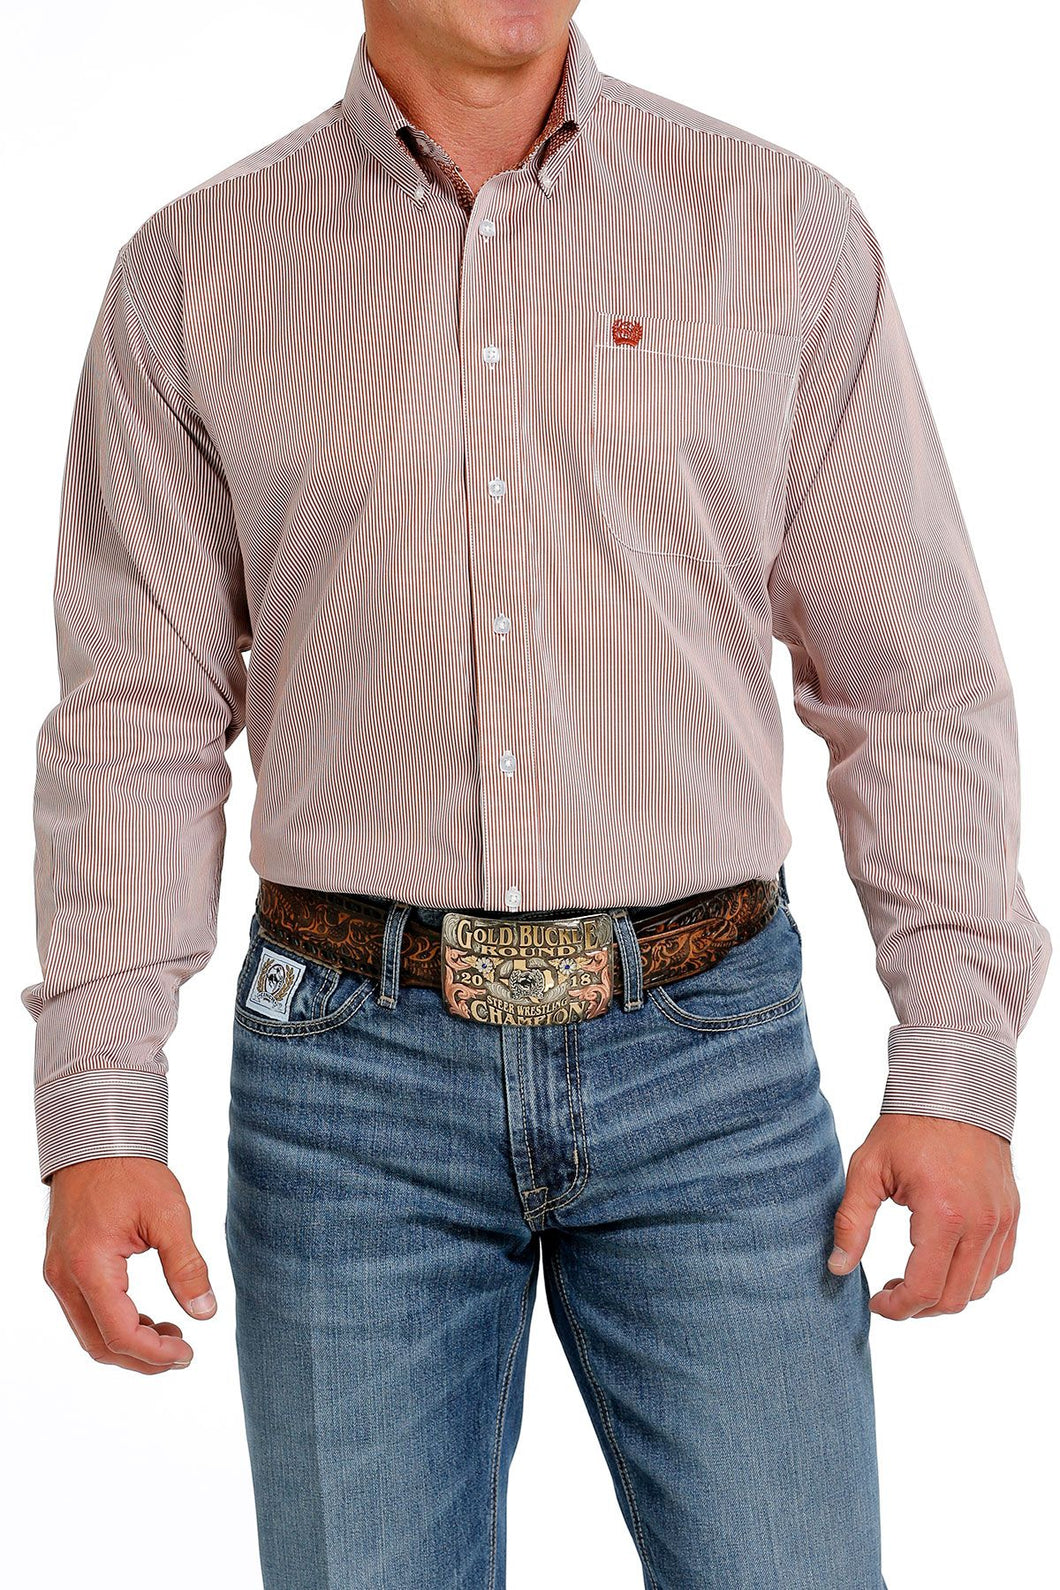 Cinch Long Sleeve Striped Button-Down shirt with Front Pocket